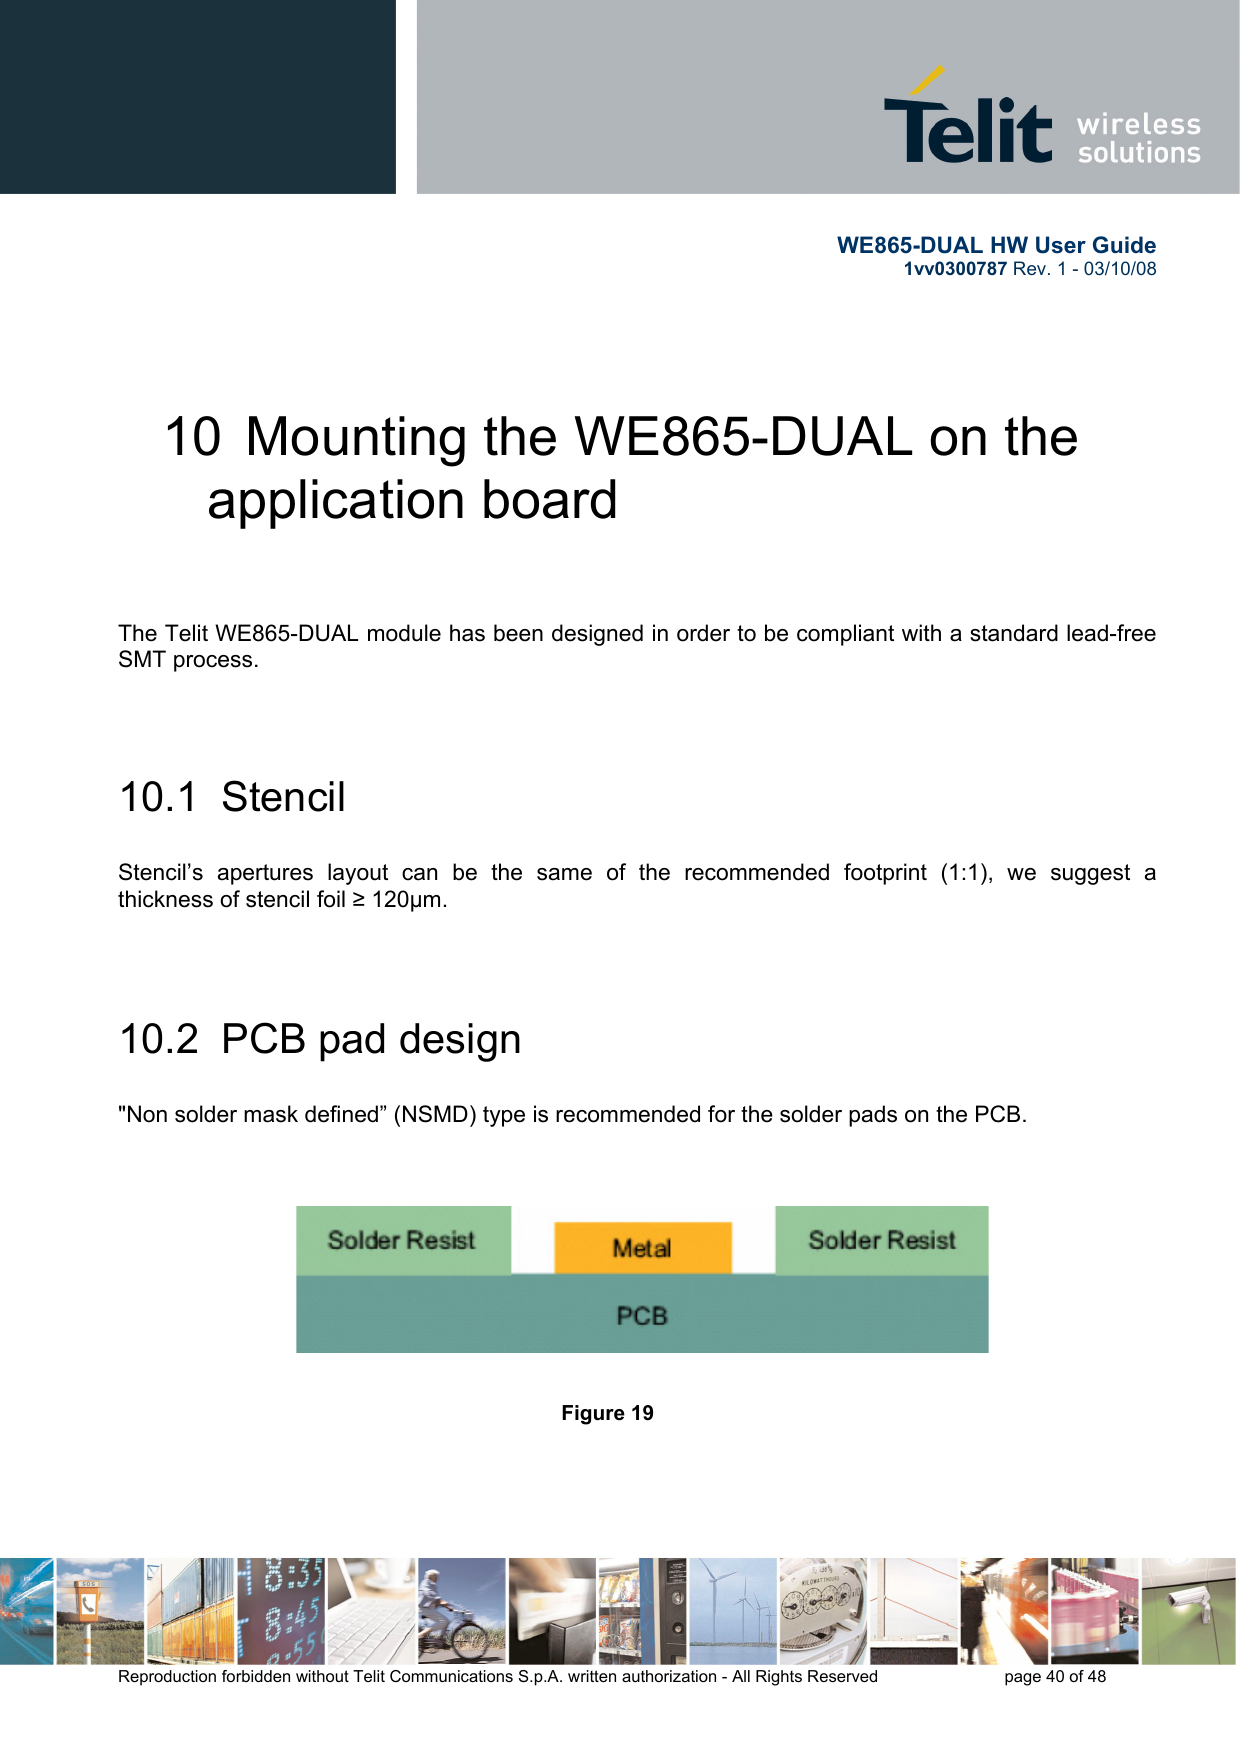       WE865-DUAL HW User Guide 1vv0300787 Rev. 1 - 03/10/08      Reproduction forbidden without Telit Communications S.p.A. written authorization - All Rights Reserved    page 40 of 48  10  Mounting the WE865-DUAL on the application board   The Telit WE865-DUAL module has been designed in order to be compliant with a standard lead-free SMT process.   10.1  Stencil  Stencil’s apertures layout can be the same of the recommended footprint (1:1), we suggest a thickness of stencil foil ≥ 120μm.   10.2  PCB pad design  &quot;Non solder mask defined” (NSMD) type is recommended for the solder pads on the PCB.                                    Figure 19     